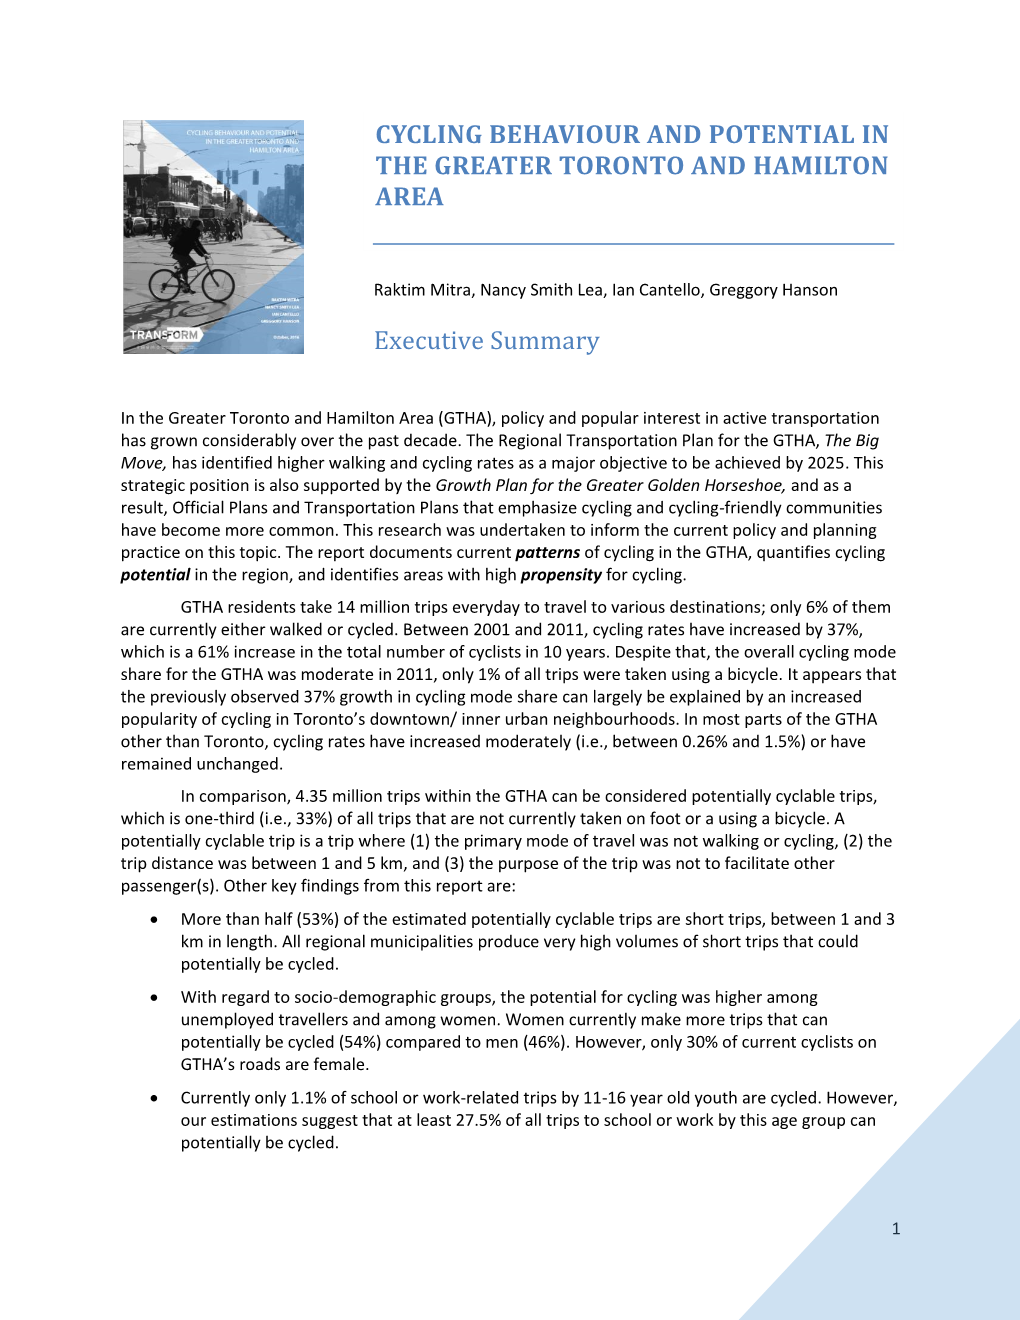 Executive Summary: Cycling Potential in the GTHA